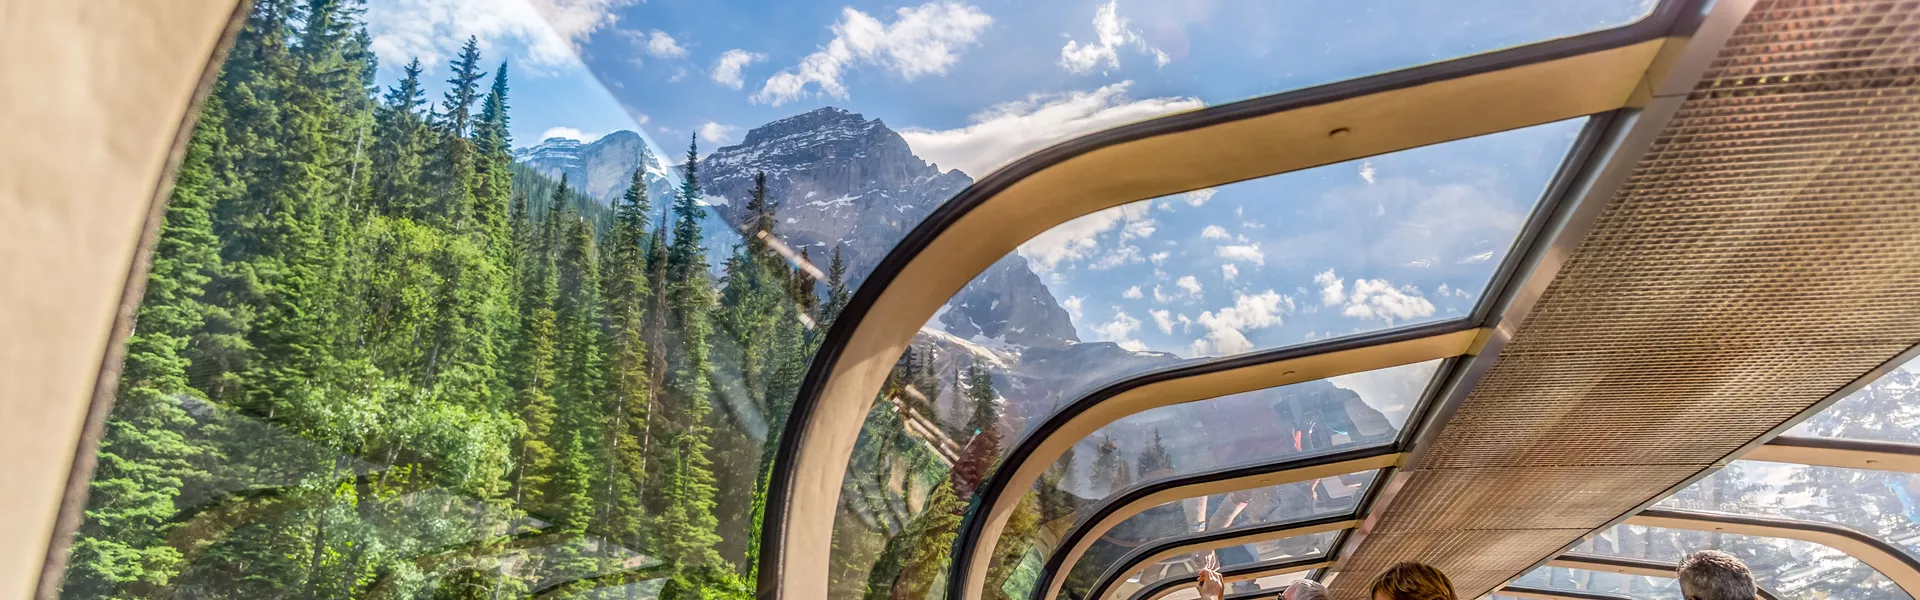 Rocky Mountaineer train traveling through the Rocky Mountains with luxury dining on board 